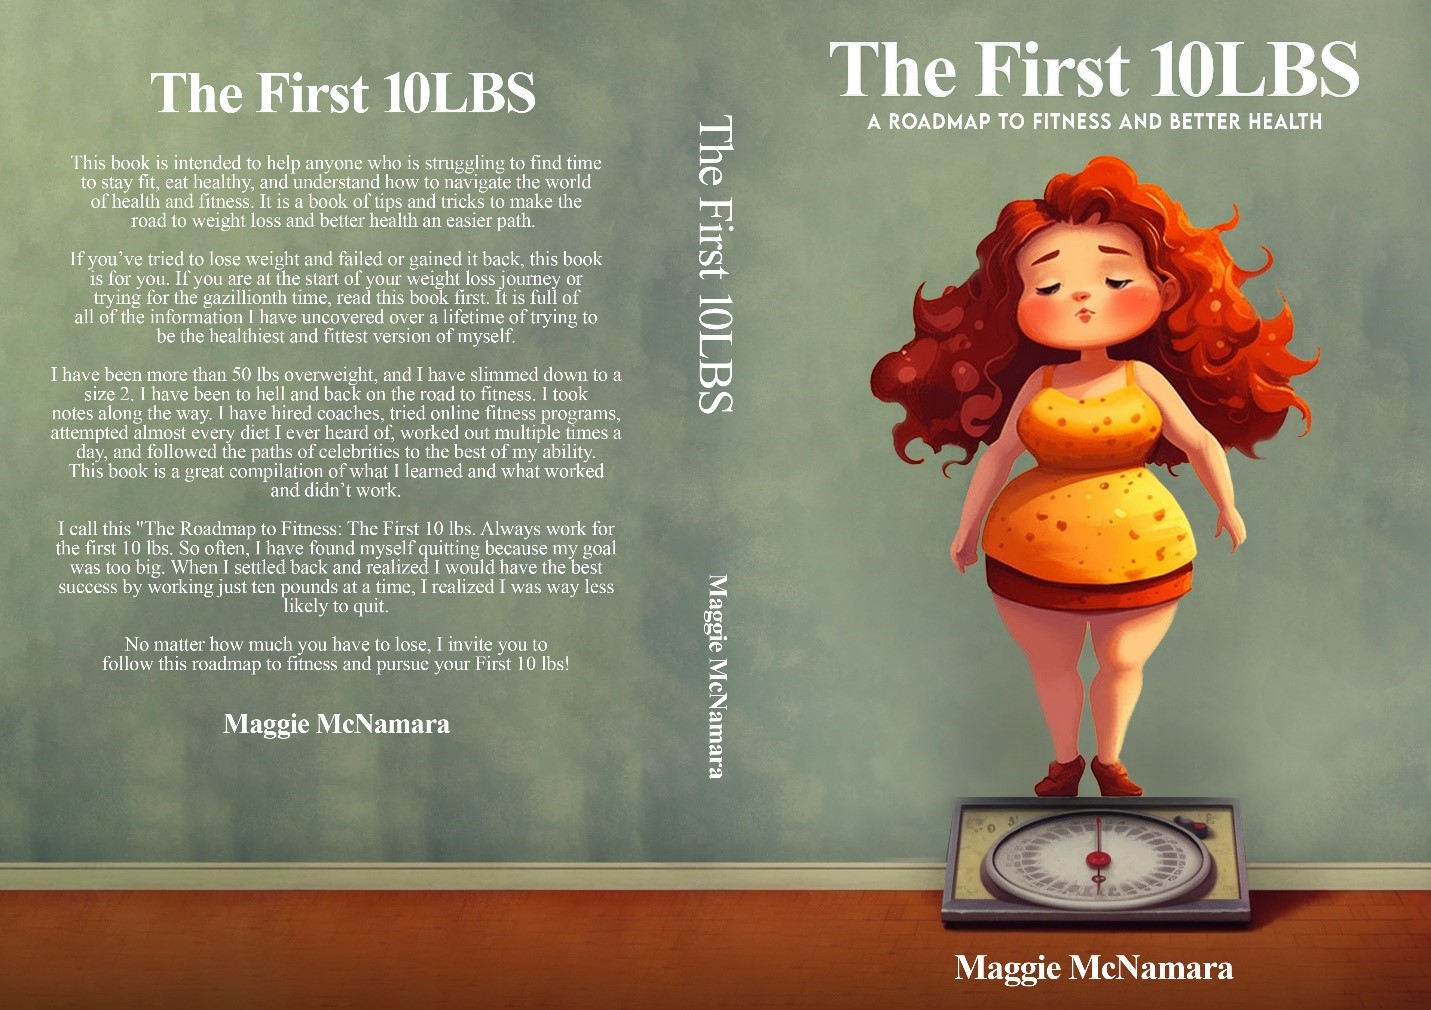 Discover the Ultimate Roadmap to Fitness in "The First 10LBS" by Maggie McNamara